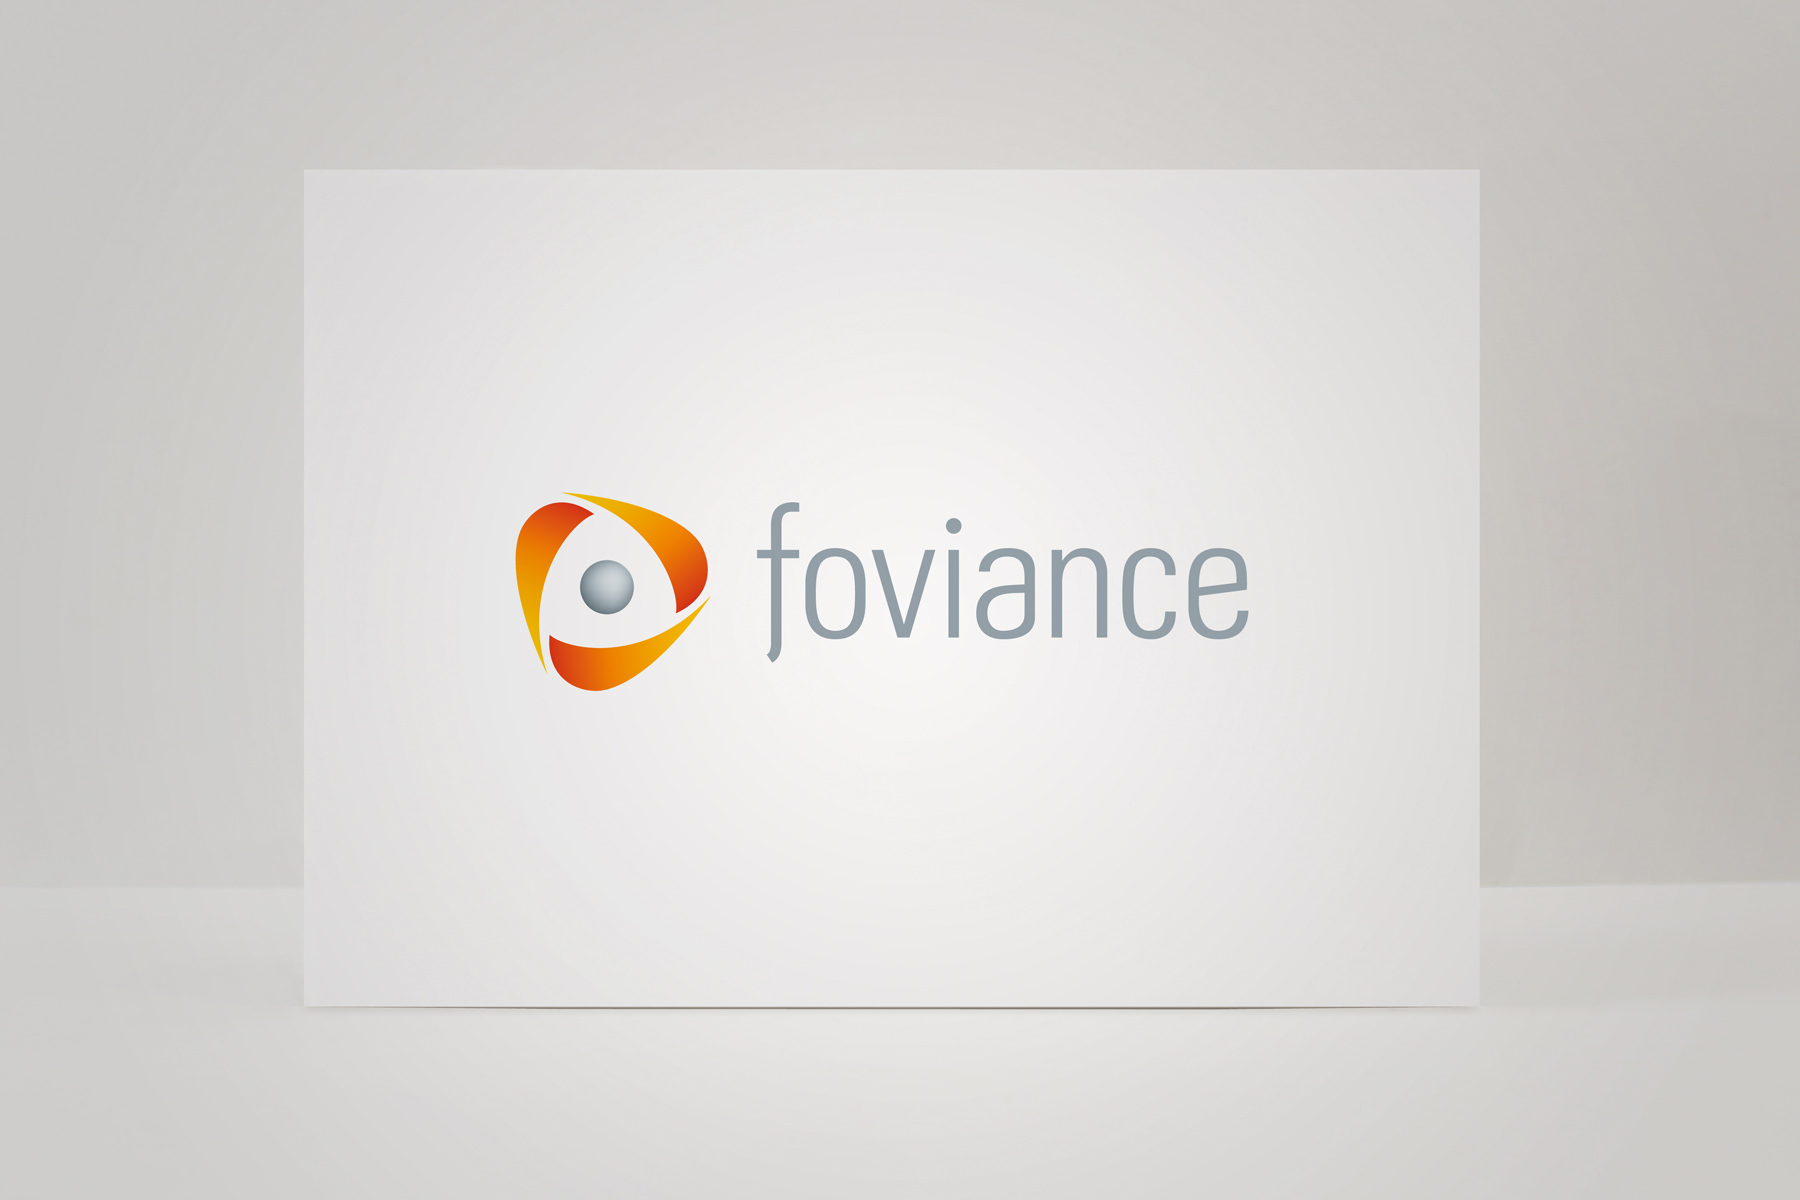 The Foviance brand is the result of a merger between two companies. The icon is a representation of their new three tiered offering.